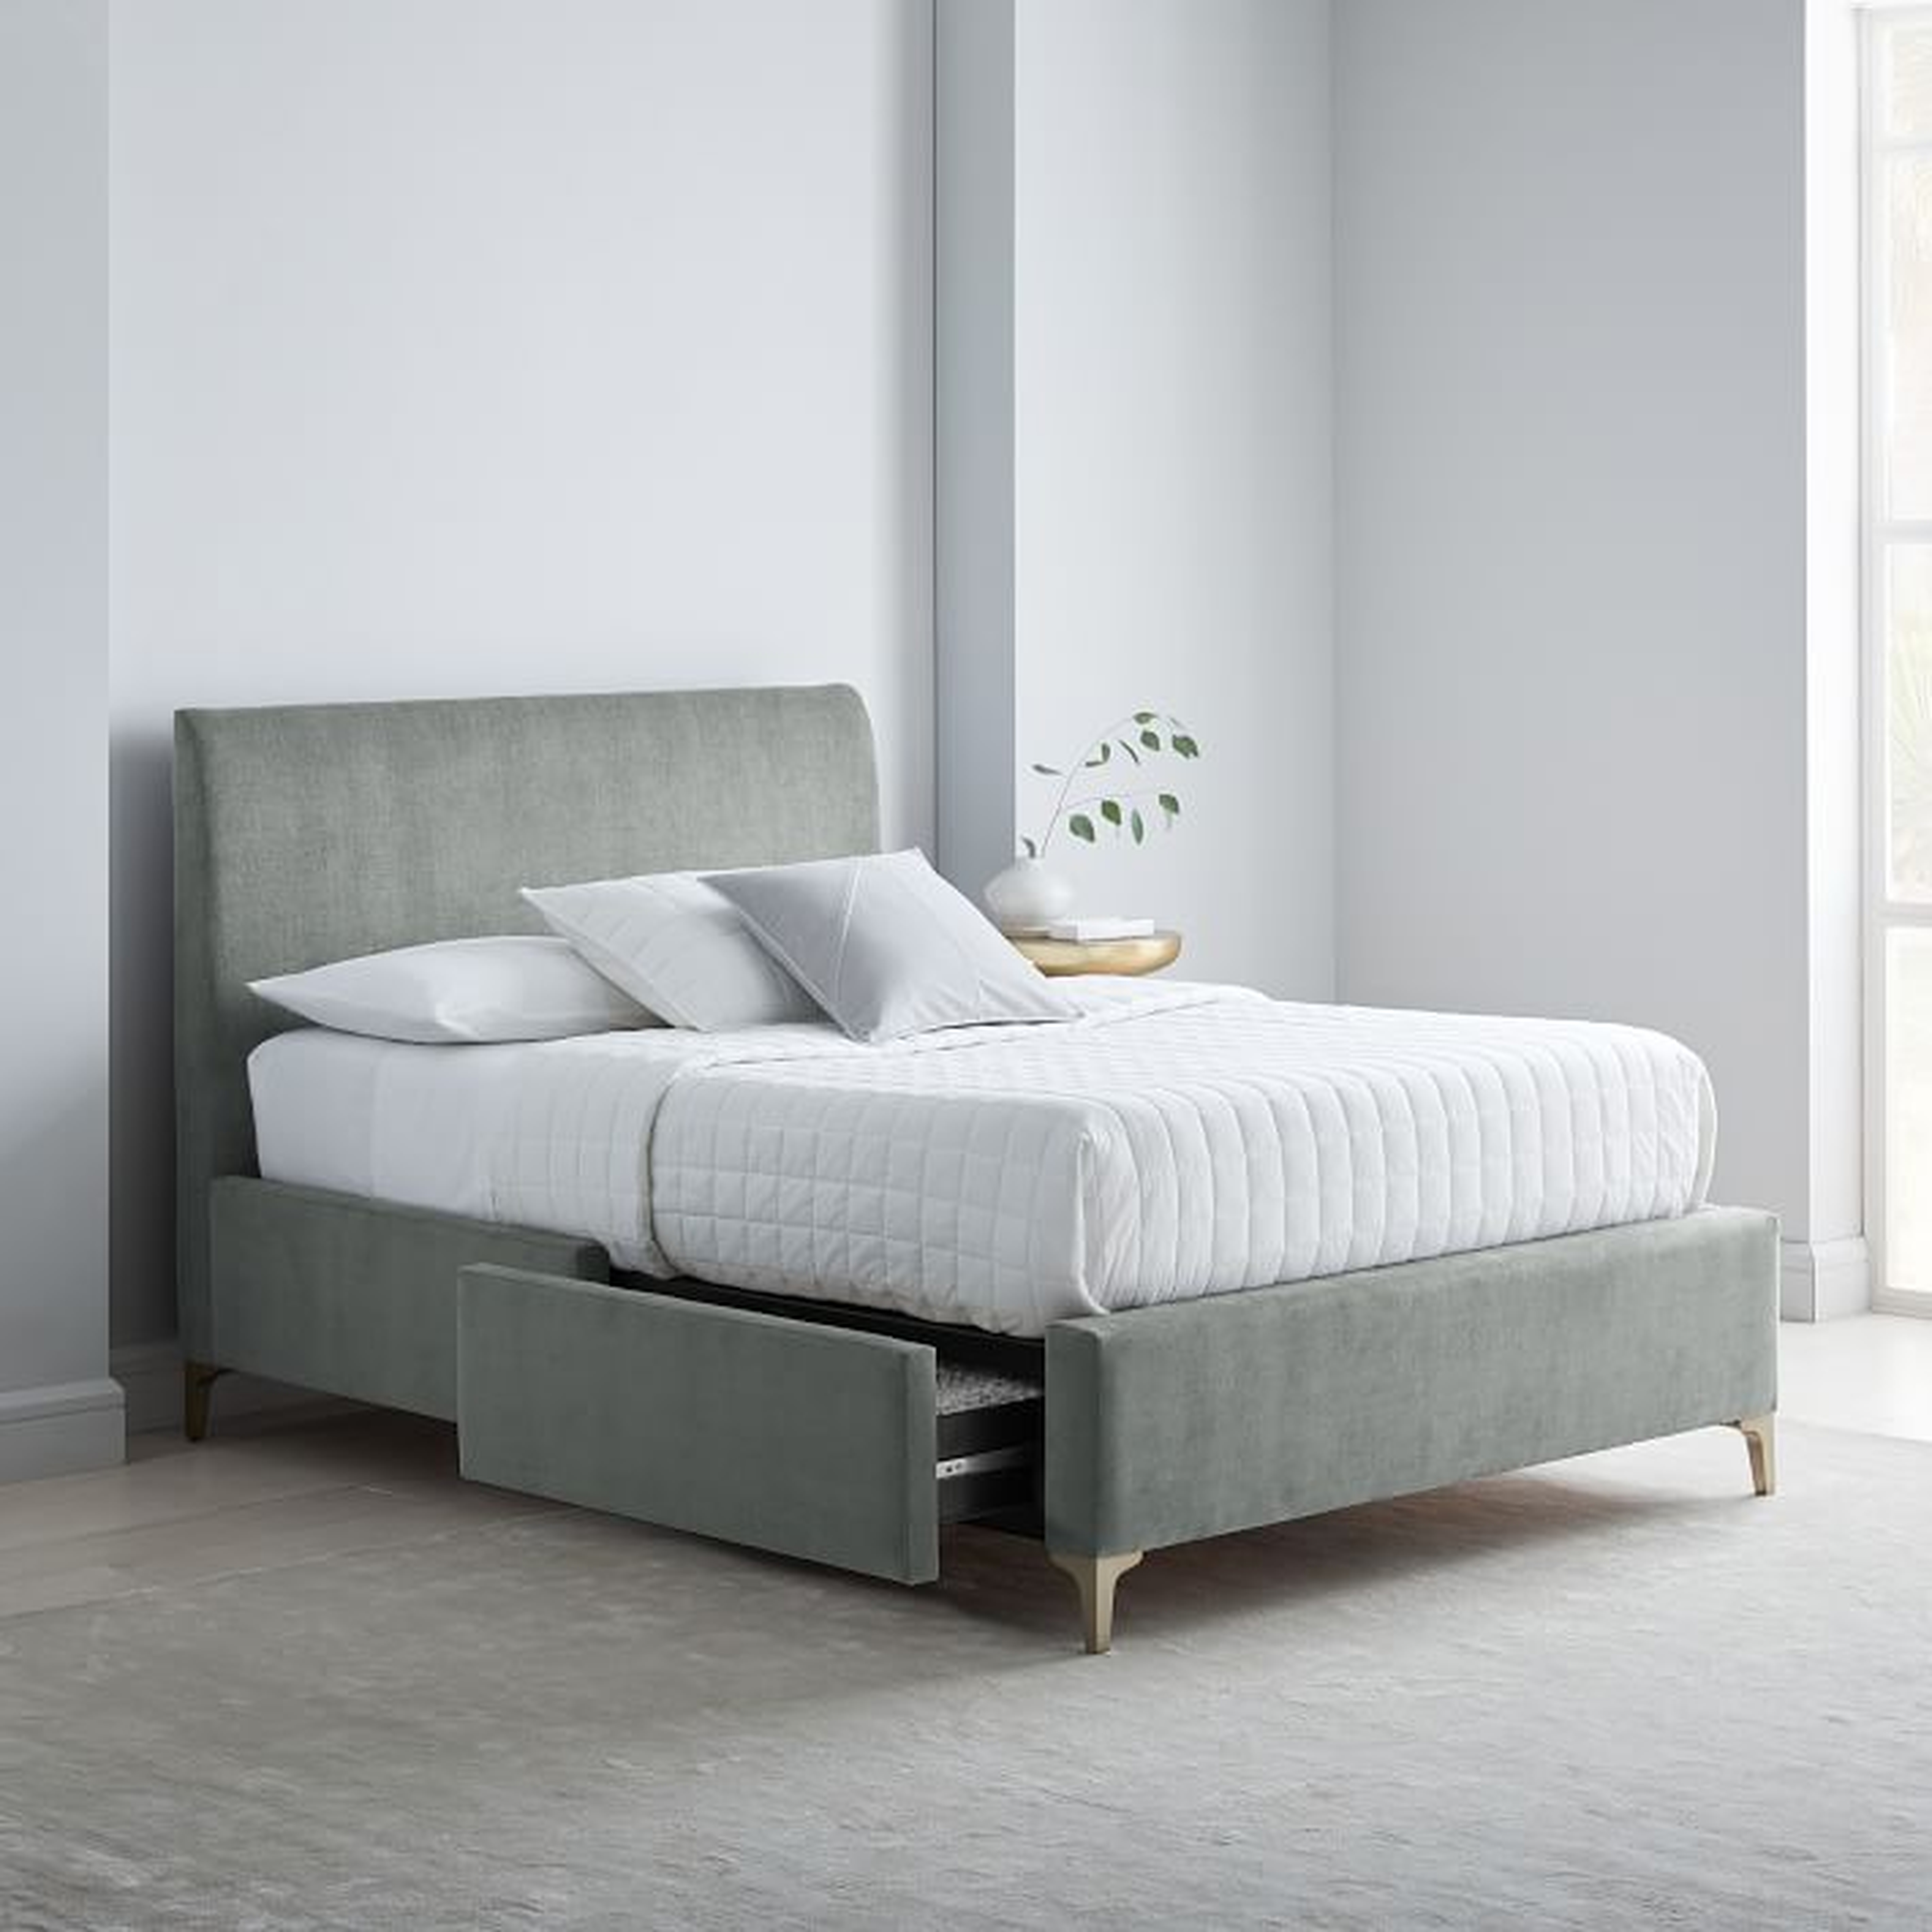 Andes Deco Upholstered Storage Bed, King, Performance Washed Canvas, Feather Gray, Light Bronze - West Elm